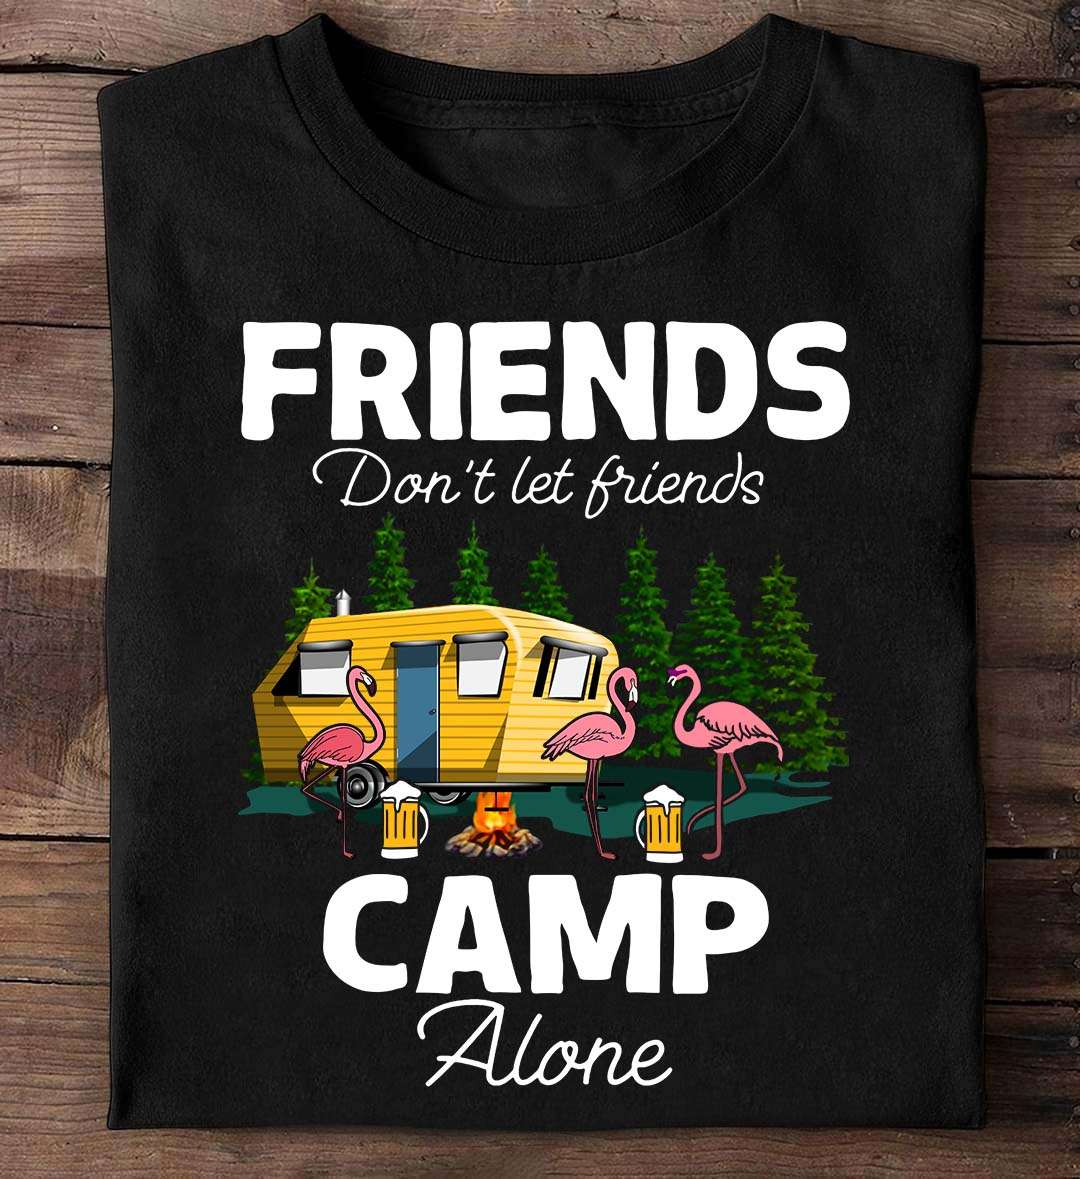 Friends - don't let friends camp alone, camping partner for life, flamingo camping the hobby